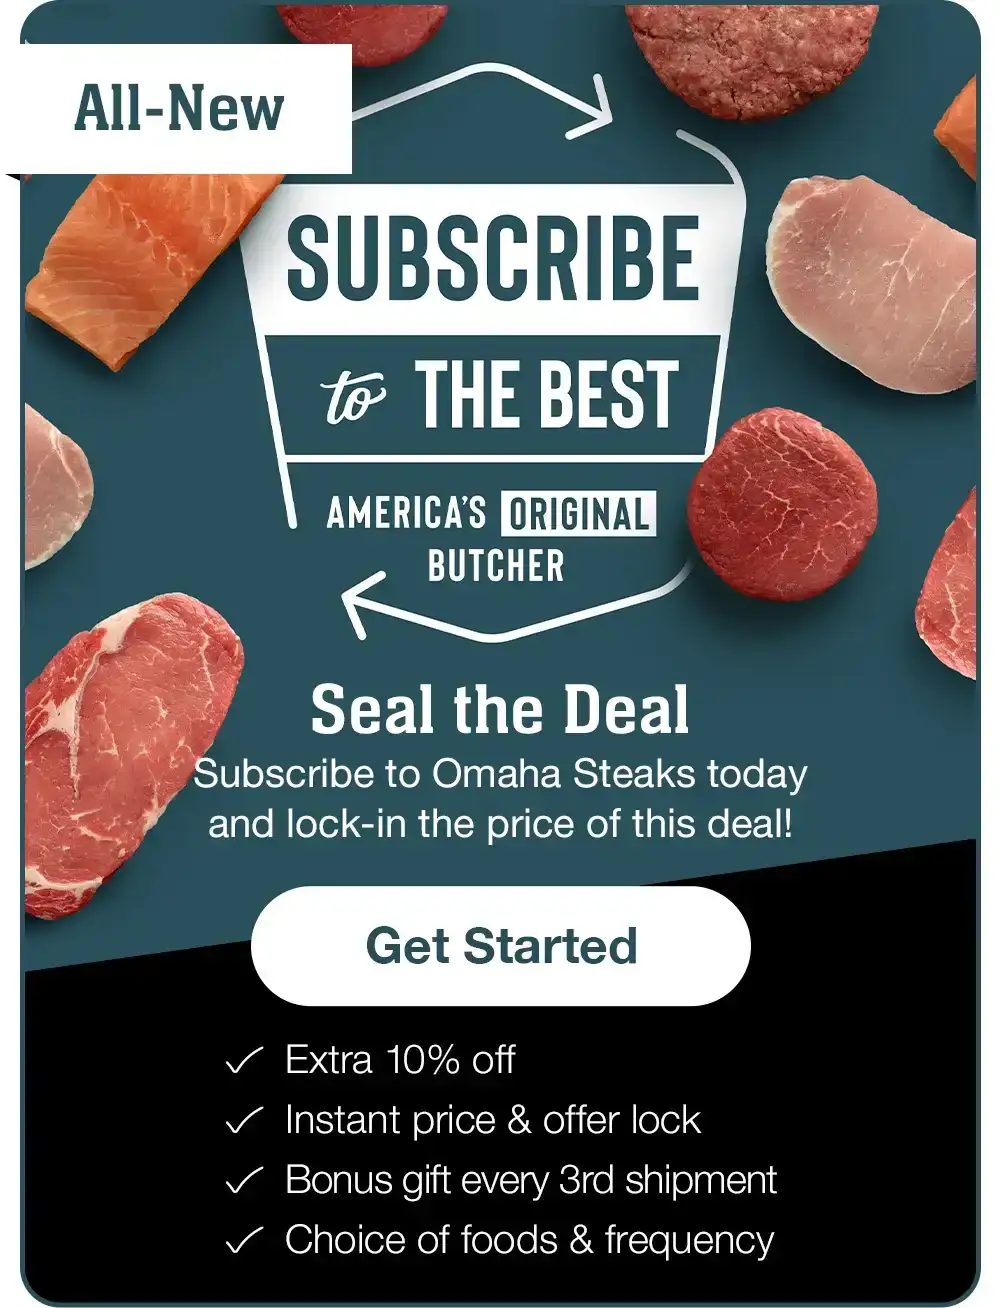 ALL NEW | SUBSCRIBE TO THE BEST - AMERICA'S ORIGINAL BUTCHER | Seal the Deal - Subscribe to Omaha Steaks today and lock-in the price of this deal! || Get Started || Extra 10% off | Instant price & offer lock | Bonus gift every 3rd shipment | Choice of foods & frequency